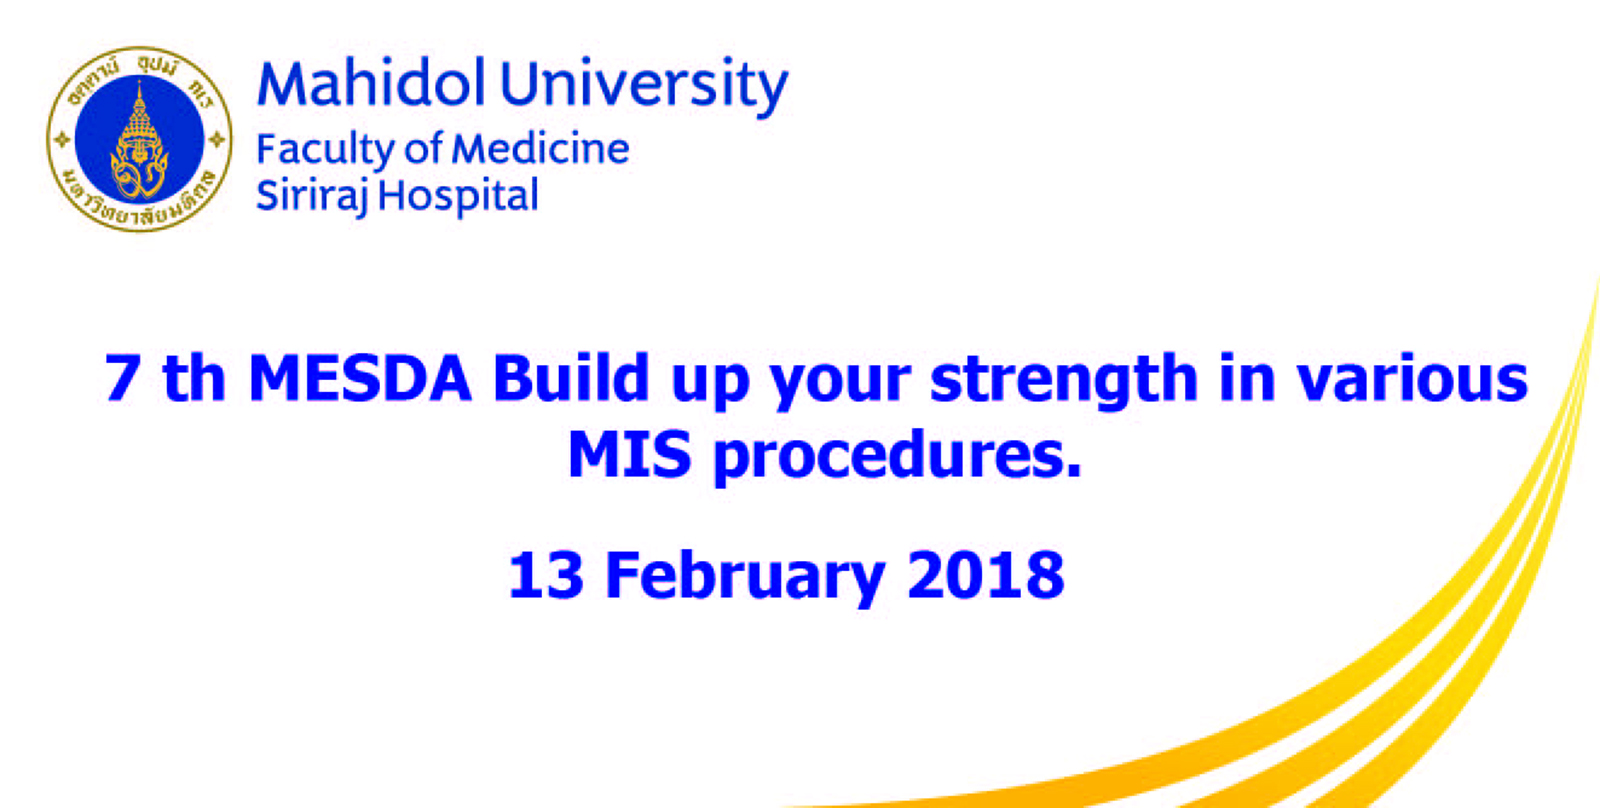 7 th MESDA Build up your strength in various MIS procedures.